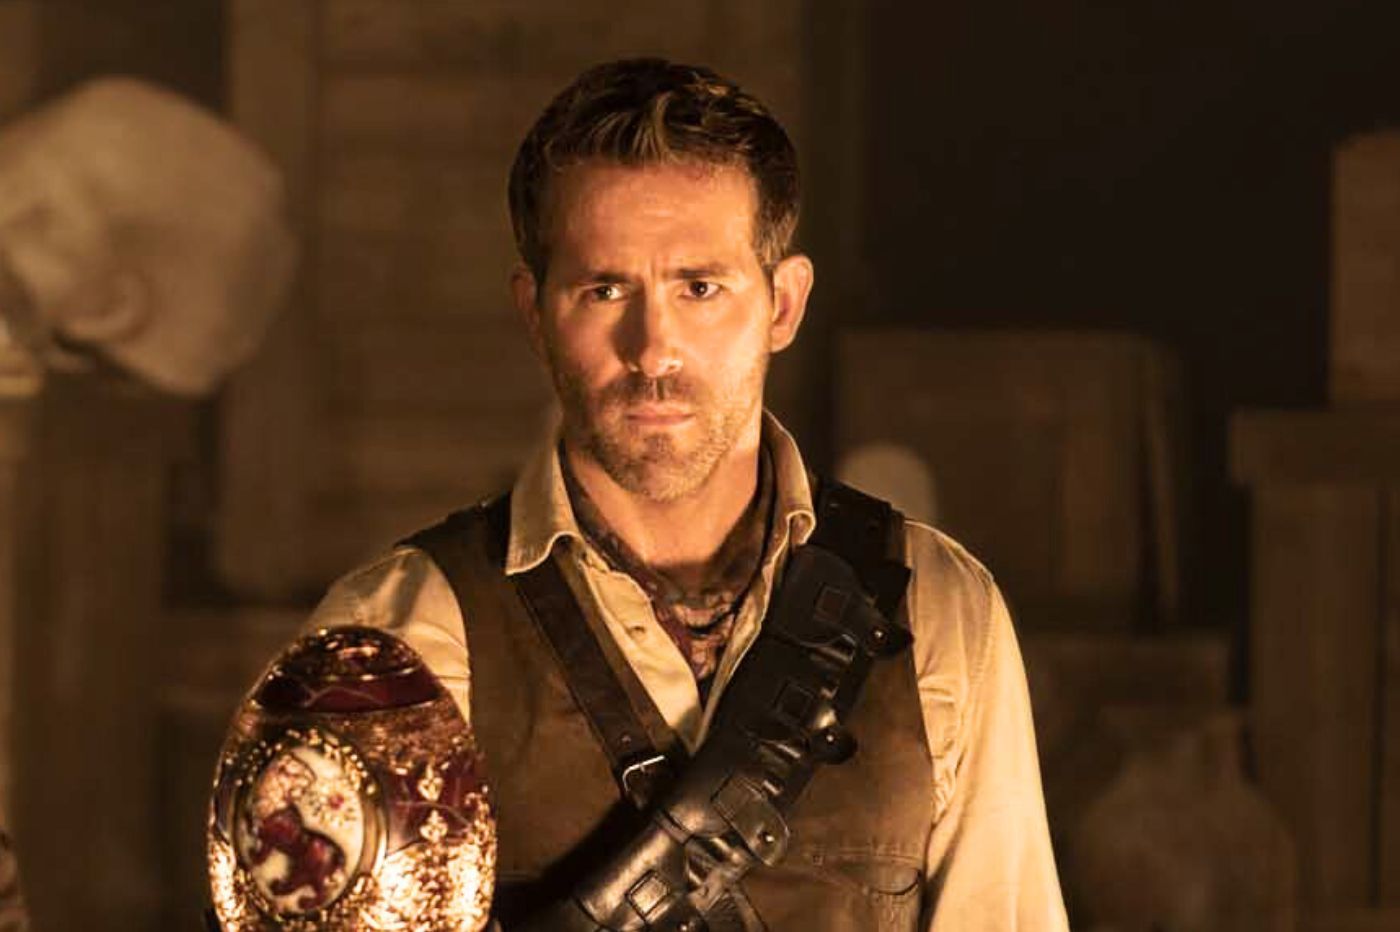 After Deadpool 3, Ryan Reynolds wants to compete with Indiana Jones